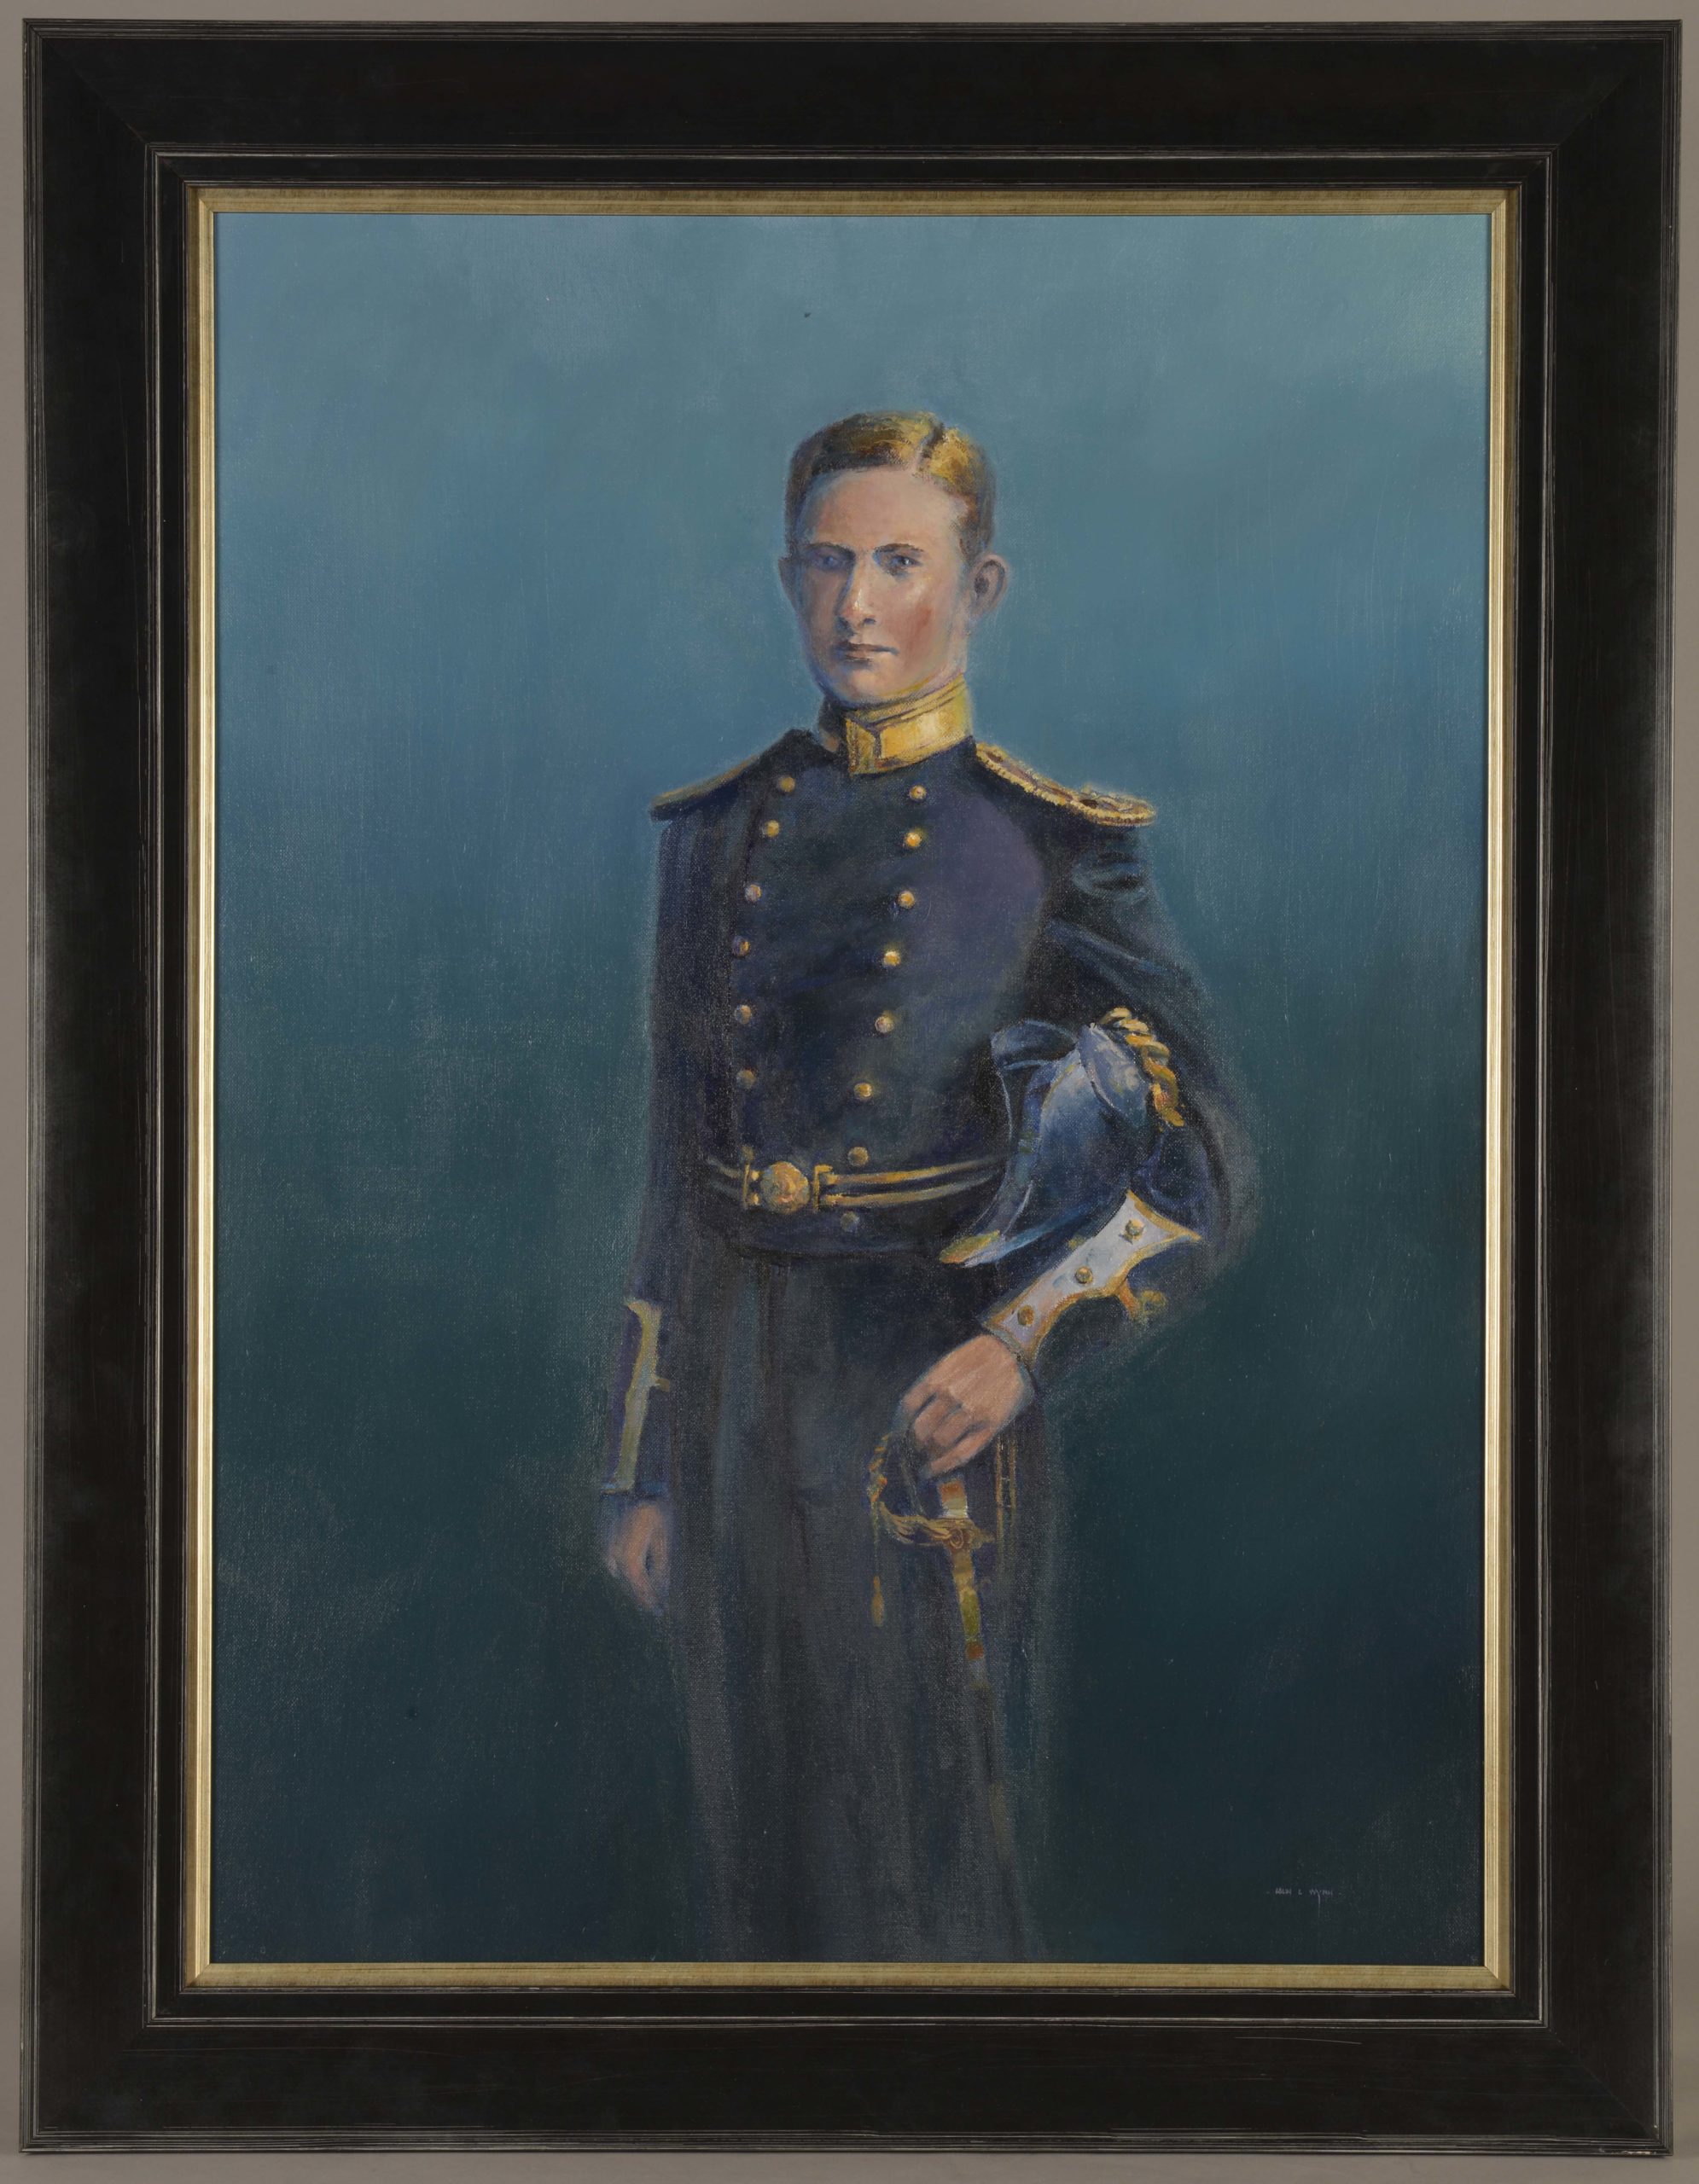 Painting of Alexander David Boyle who served in HMS New Zealand